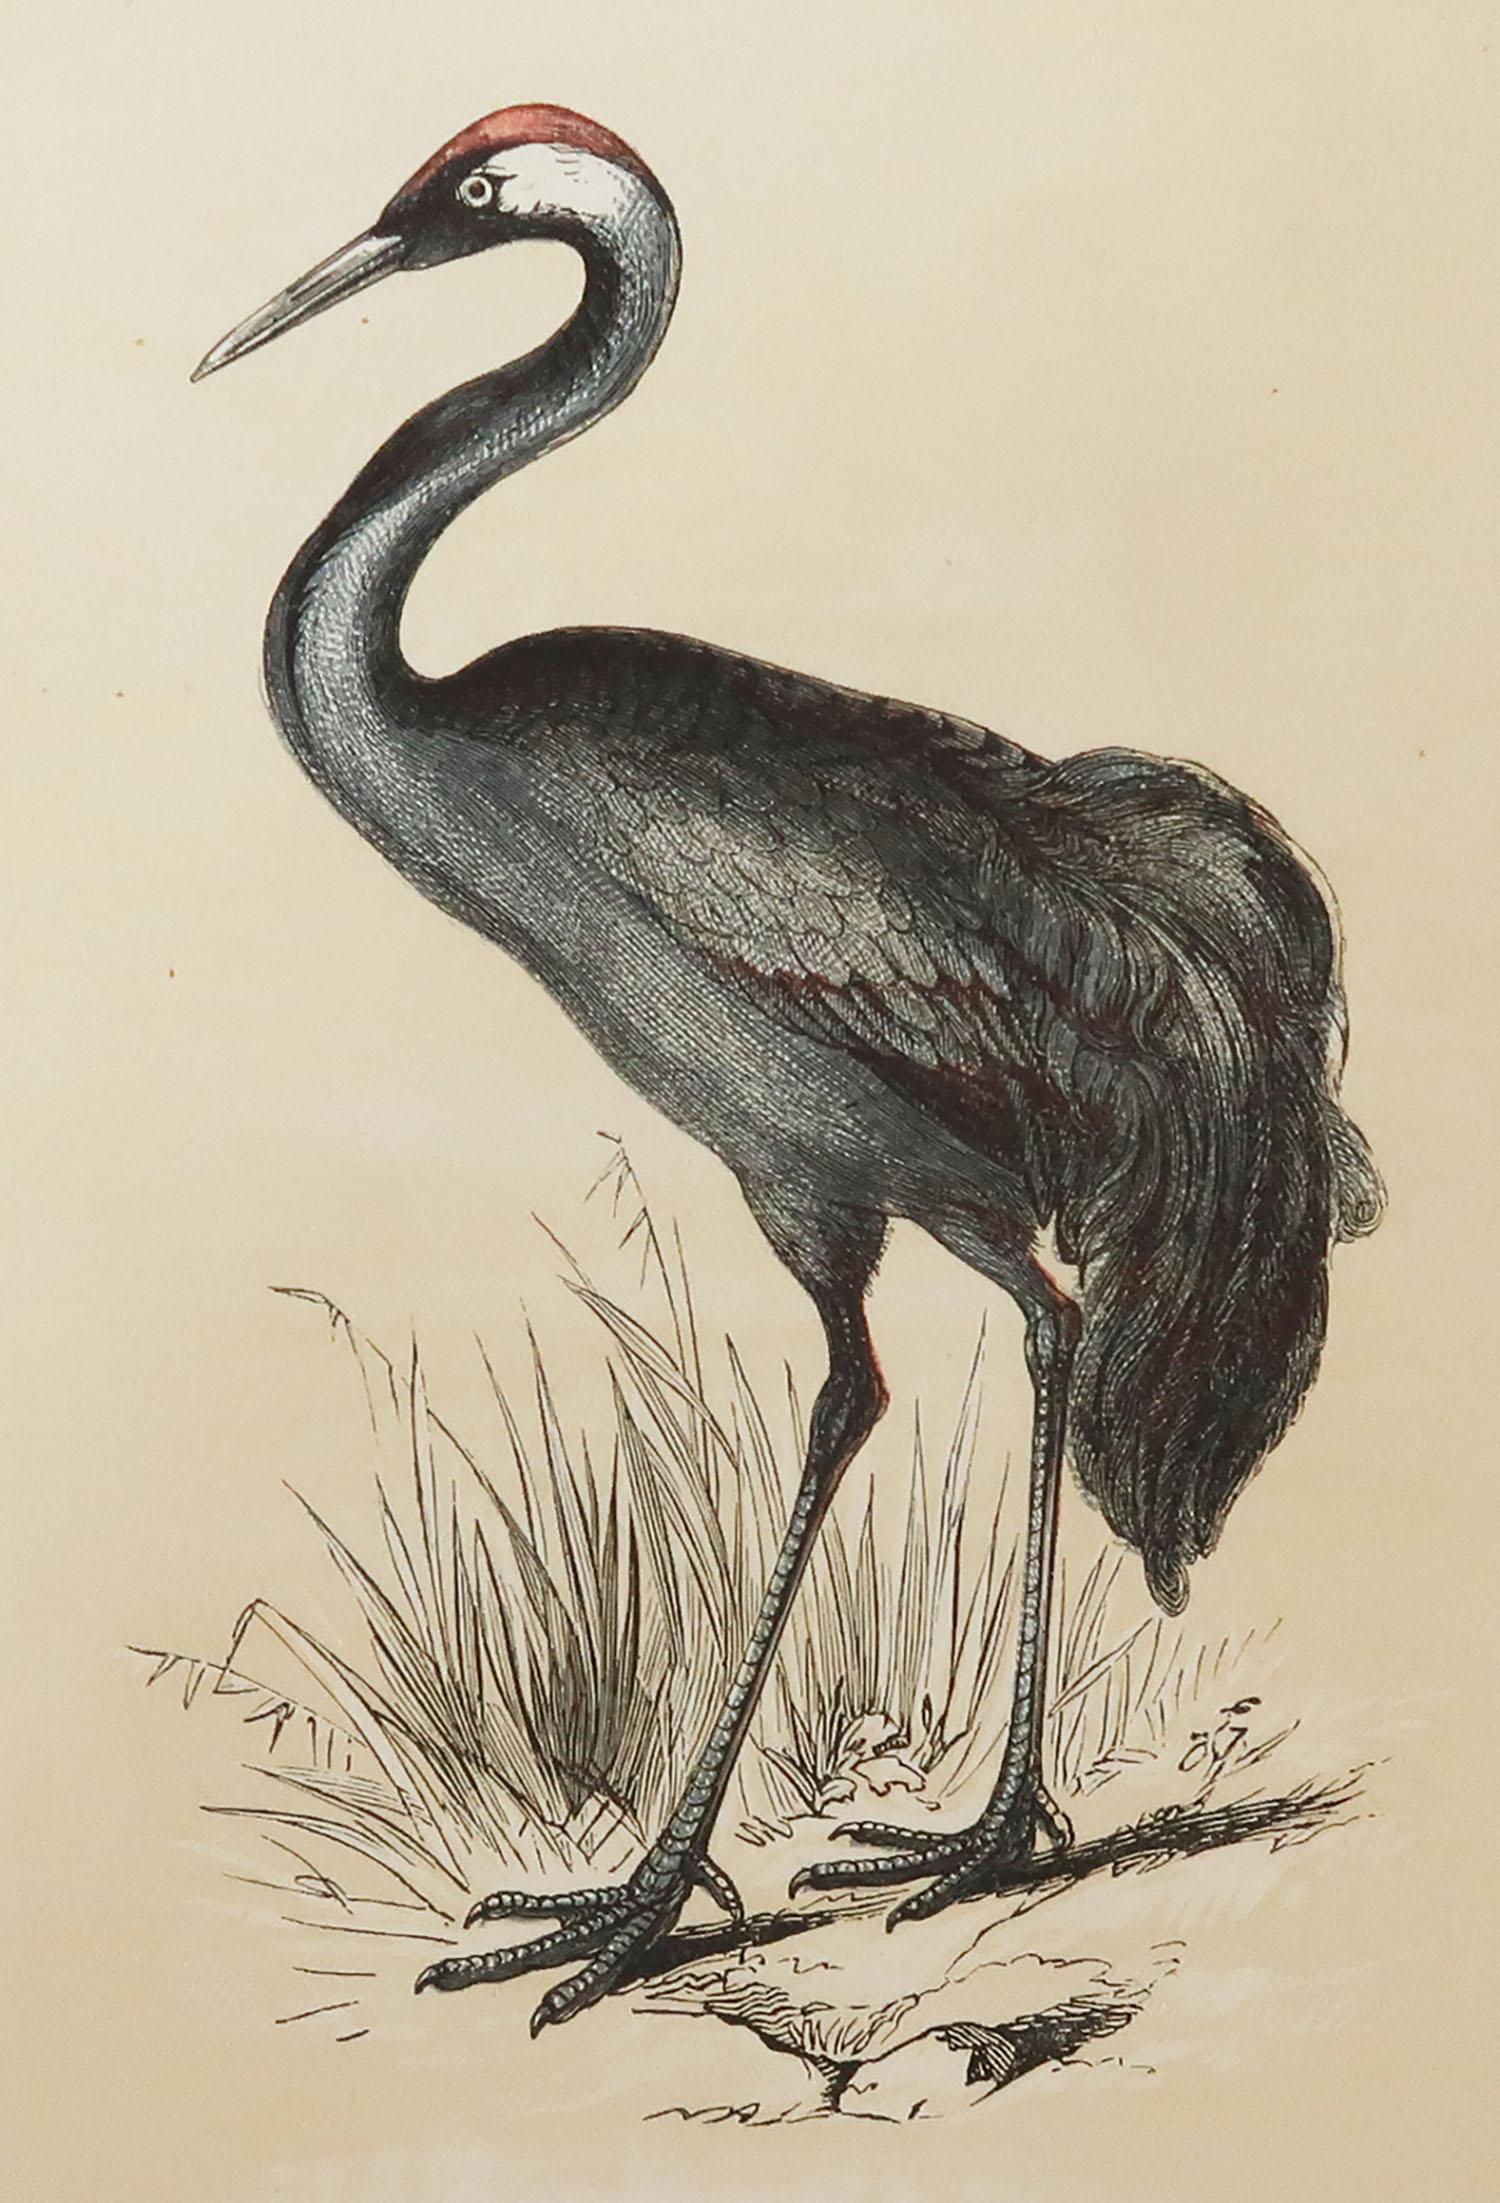 Great image of a crane

Unframed. It gives you the option of perhaps making a set up using your own choice of frames.

Lithograph with original color.

Published by Tallis circa 1850

Crudely inscribed title has been erased at the bottom of